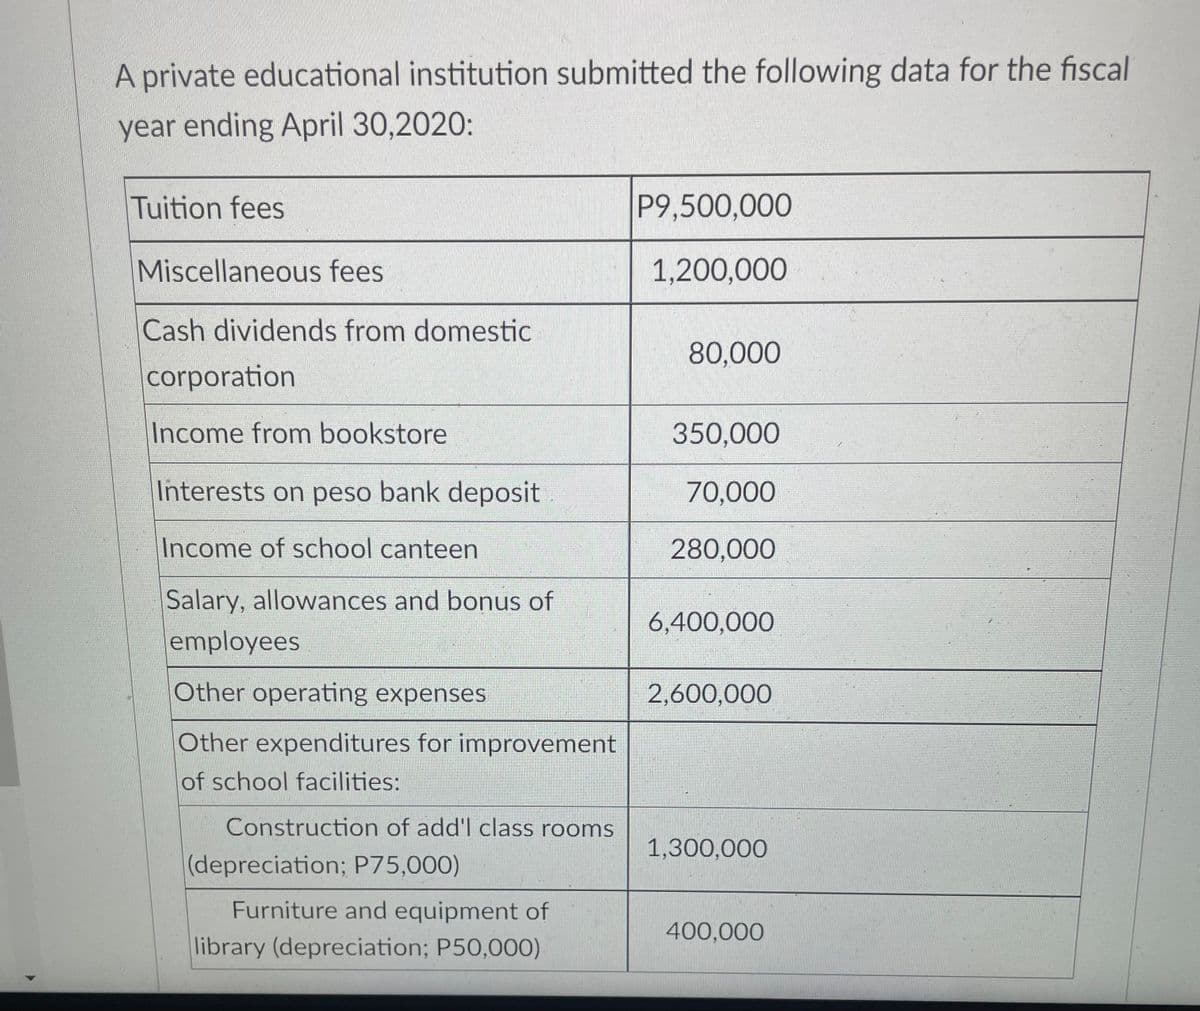 A private educational institution submitted the following data for the fiscal
year ending April 30,2020:
Tuition fees
P9,500,000
Miscellaneous fees
1,200,000
Cash dividends from domestic
80,000
corporation
Income from bookstore
350,000
Interests on peso bank deposit
70,000
Income of school canteen
280,000
Salary, allowances and bonus of
6,400,000
employees
Other operating expenses
2,600,000
Other expenditures for improvement
of school facilities:
Construction of add'l class rooms
1,300,000
(depreciation; P75,000)
Furniture and equipment of
400,000
library (depreciation; P50,000)
